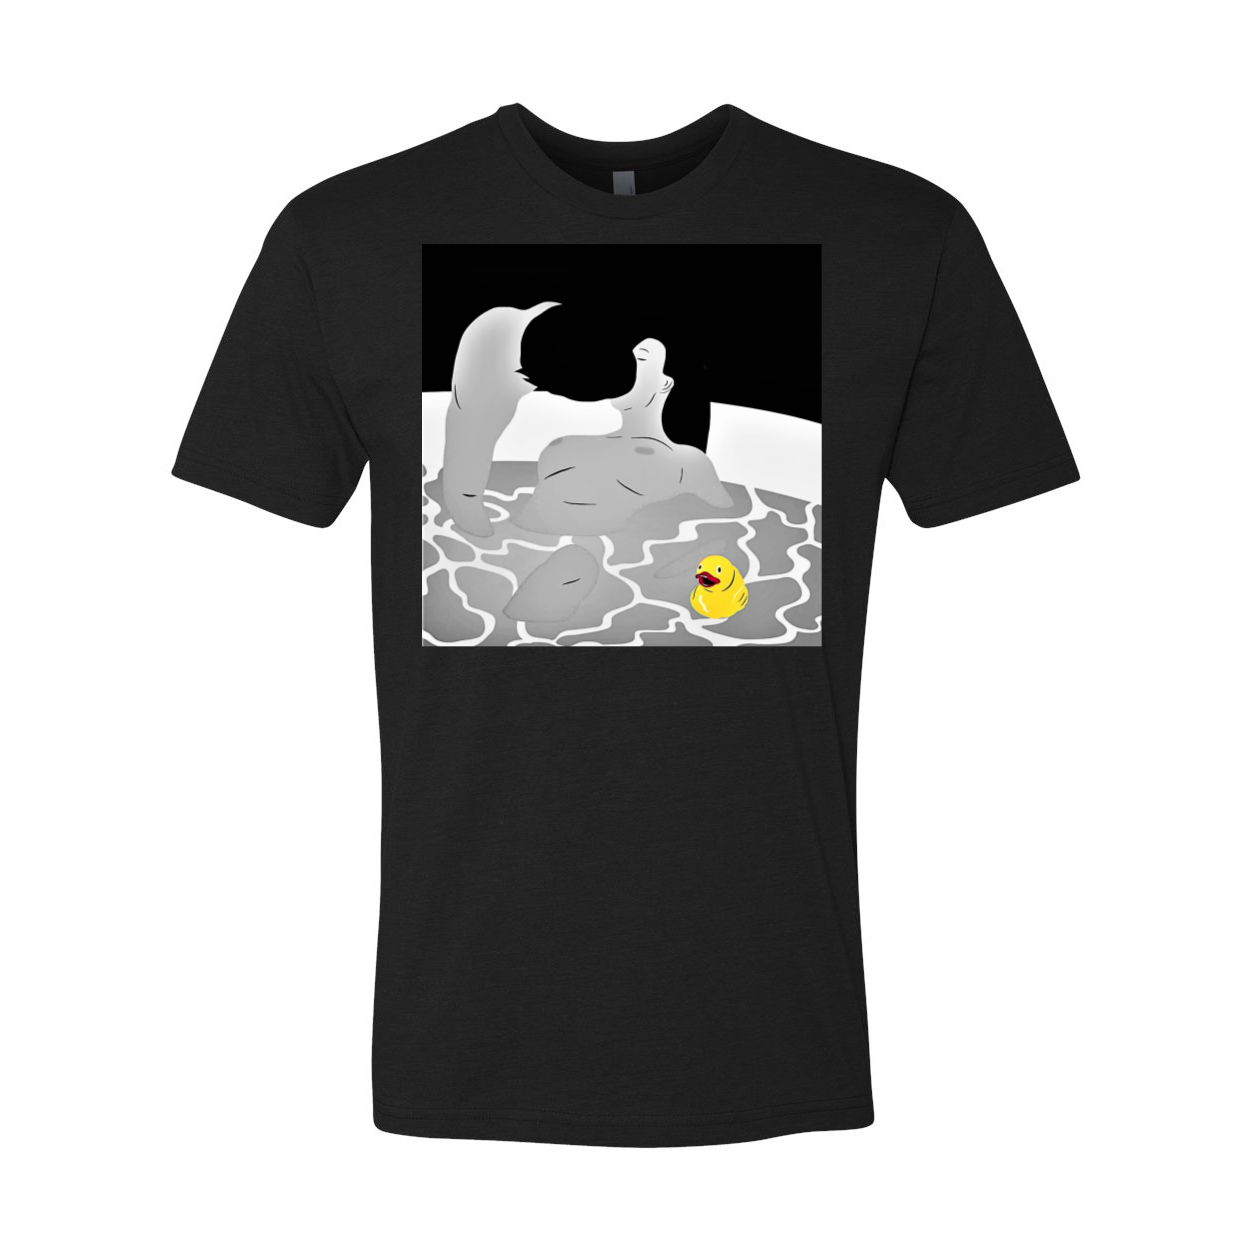 Duckie View - Mature Content Apparel